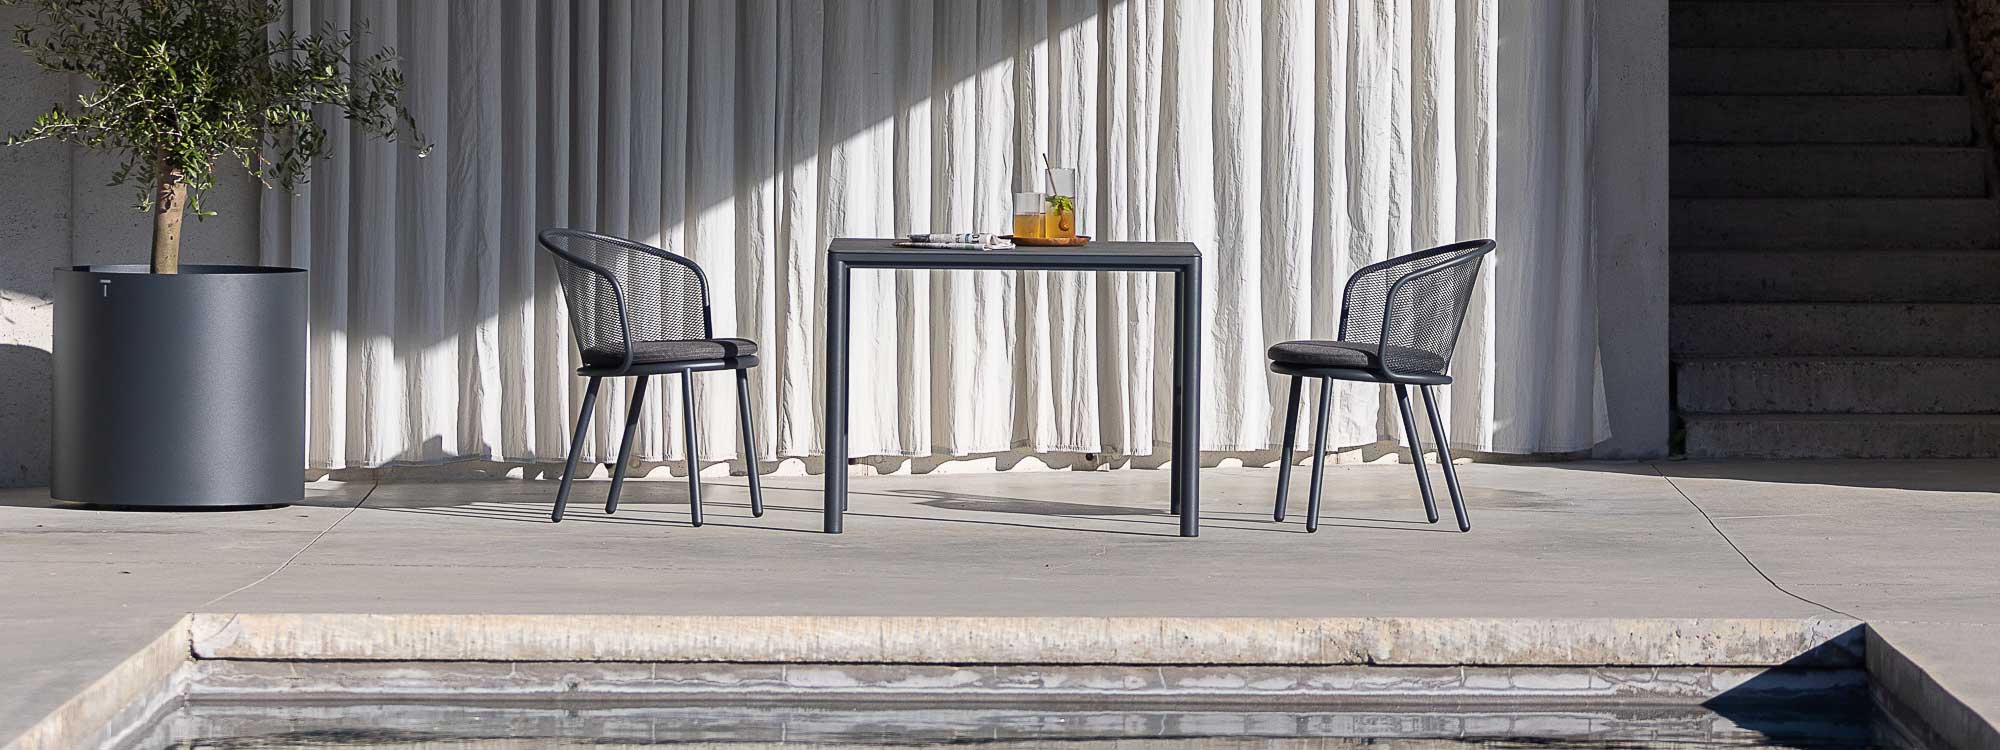 Alca garden tables & elegant outdoor dining tables with minimalist exterior table design by Studio Segers for Todus luxury garden furniture.